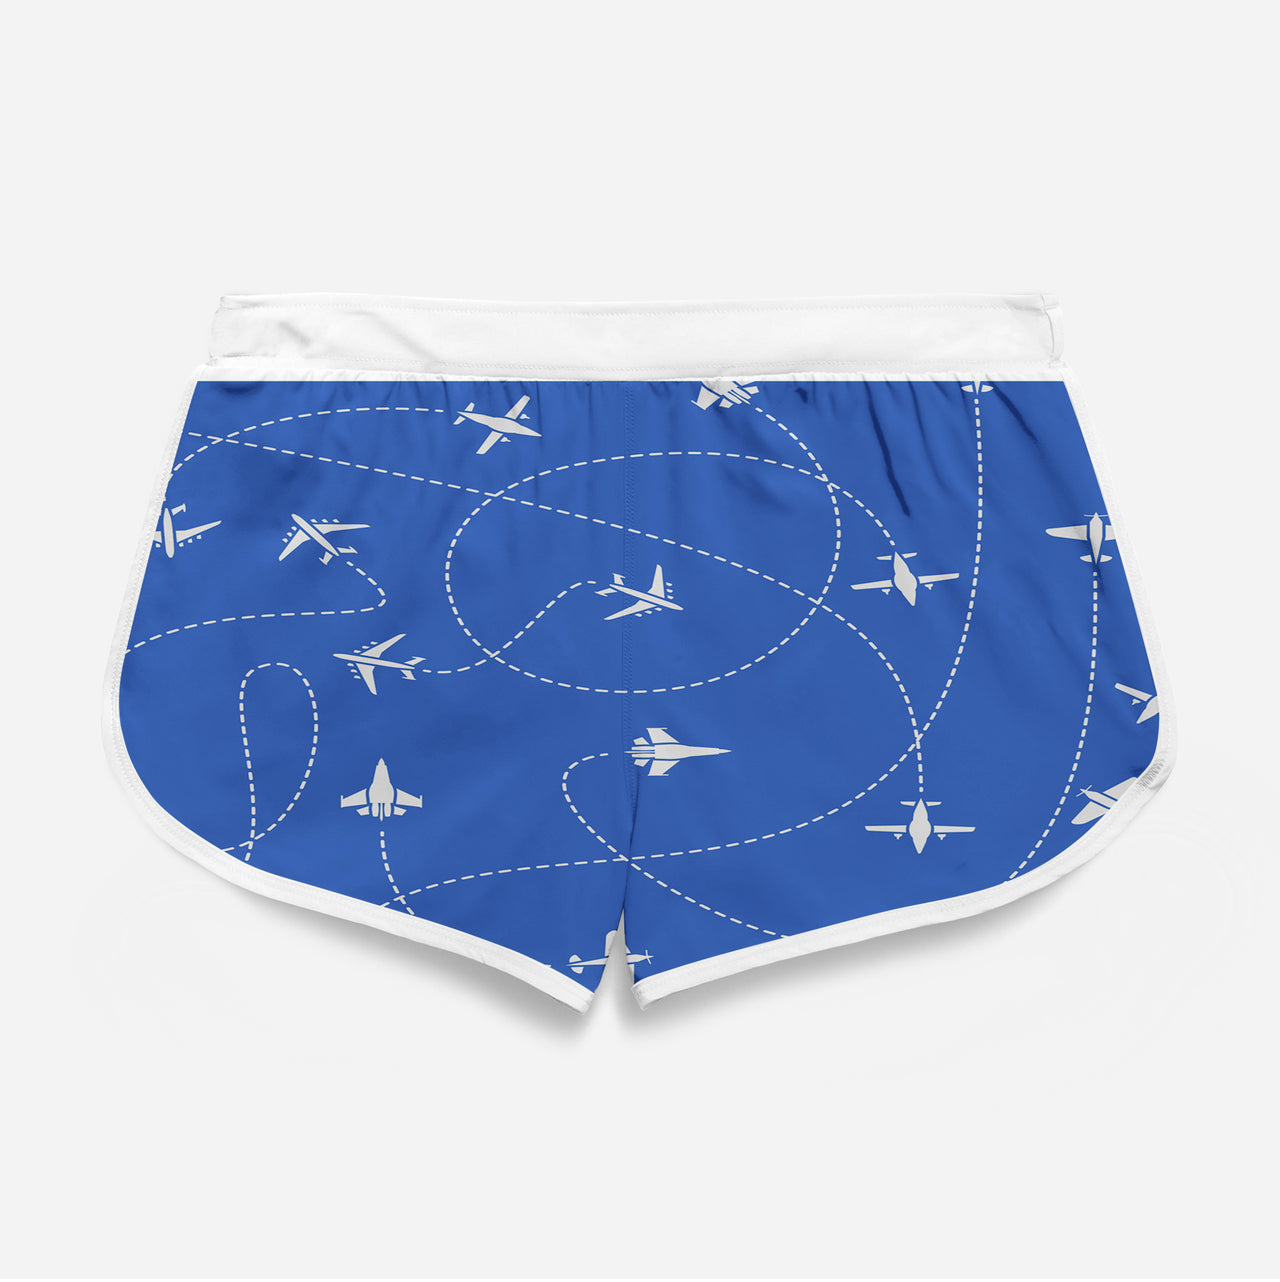 Travel The World By Plane (Blue) Designed Women Beach Style Shorts